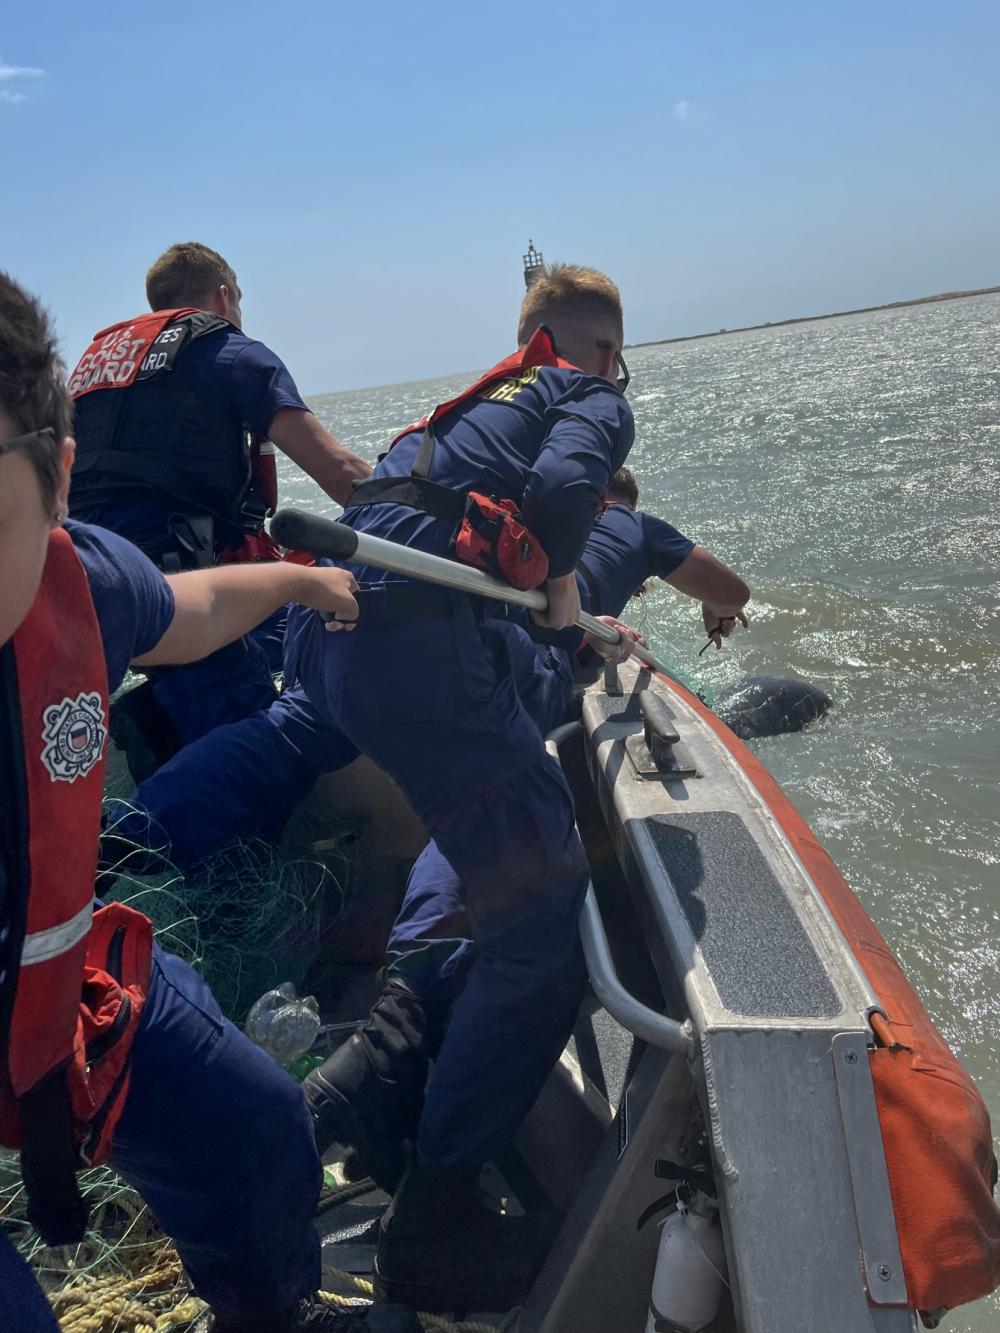 A Coast Guard Station South Padre Island boat crew cuts a dolphin free from illegal fishing nets near South Padre Island, Texas, May 4, 2022. After receiving a call from a boater about the entangled dolphin a Station South Padre Island 24-foot Special Purpose Craft-Shallow Water boat crew launched to respond. The crew freed the dolphin and removed the illegal fishing gear from the water. (U.S. Coast Guard photo by Seaman Lacie Kraatz)